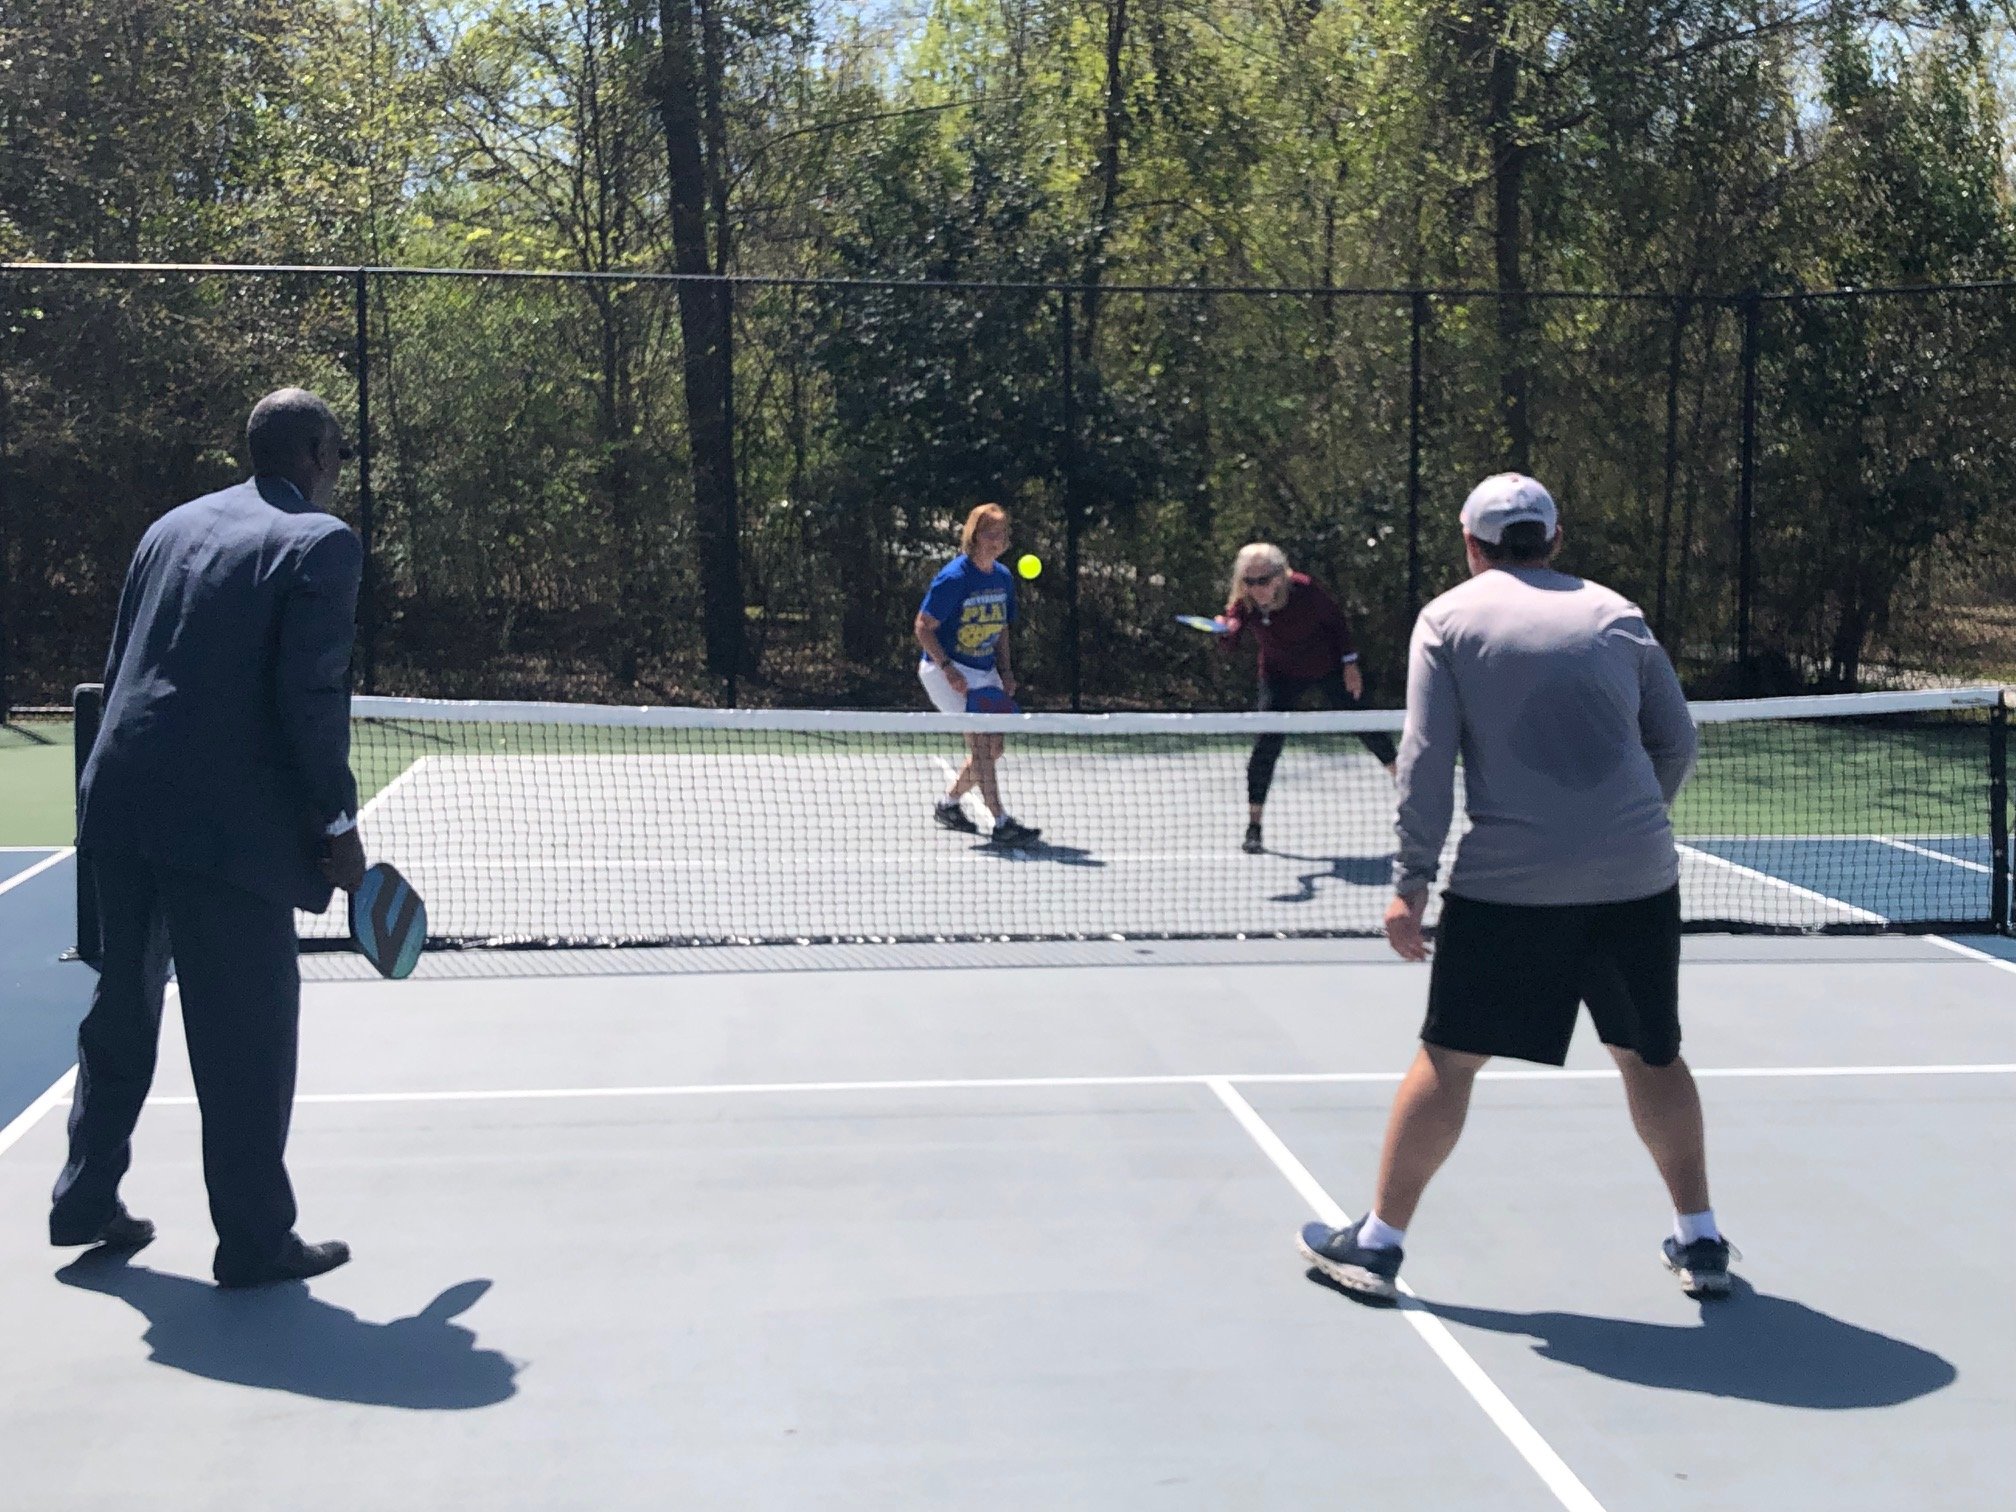 Four new pickleball courts added to Southeast Park in Columbia ABC